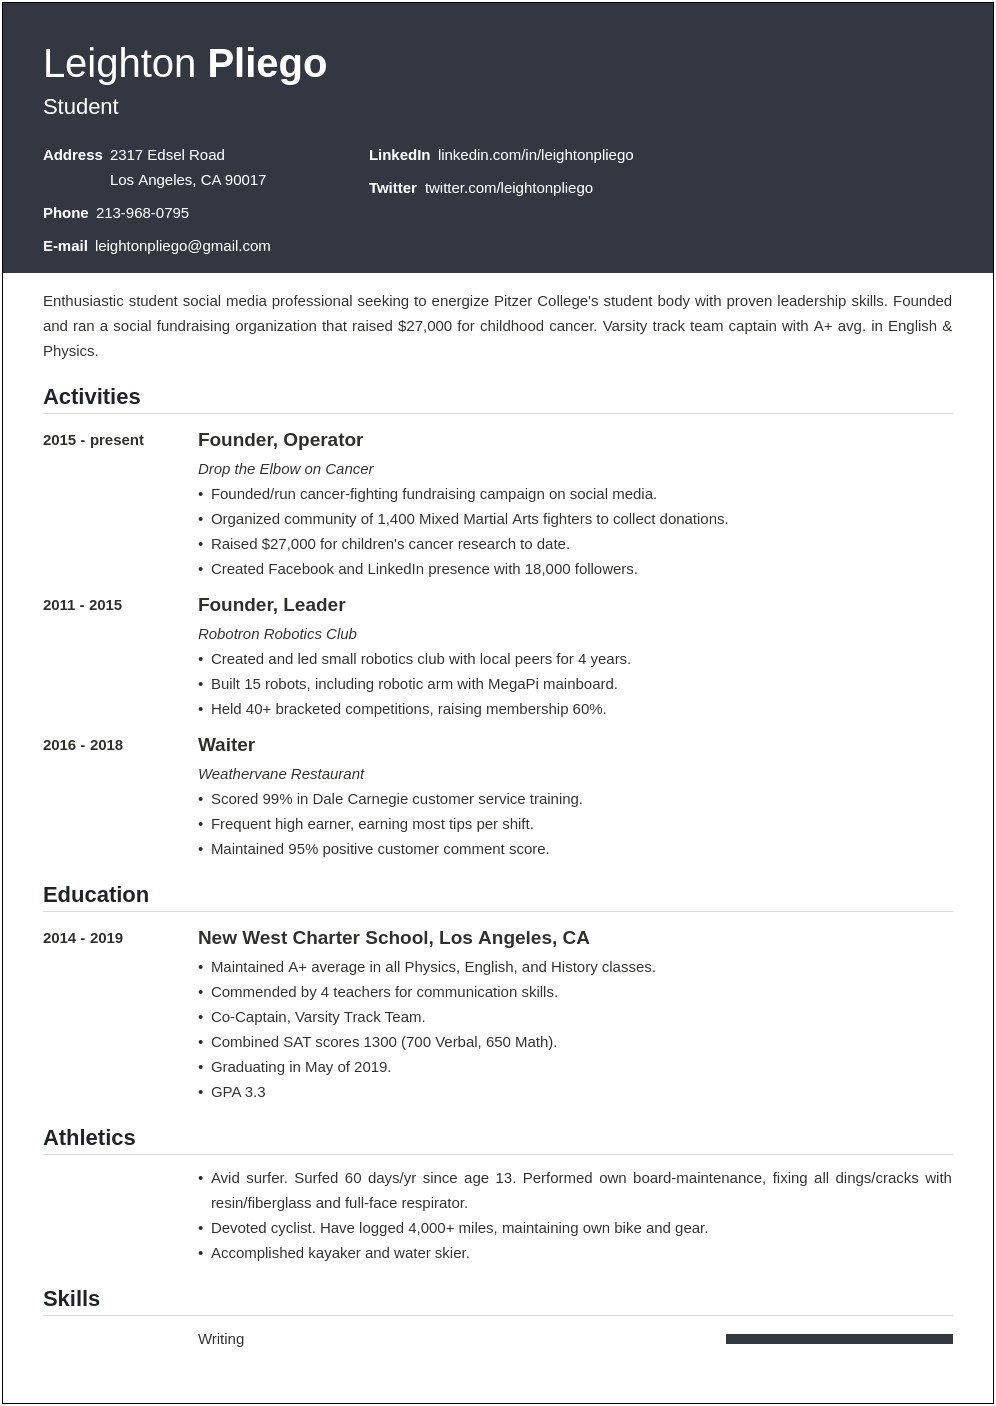 High School Resume For College Admissions Template